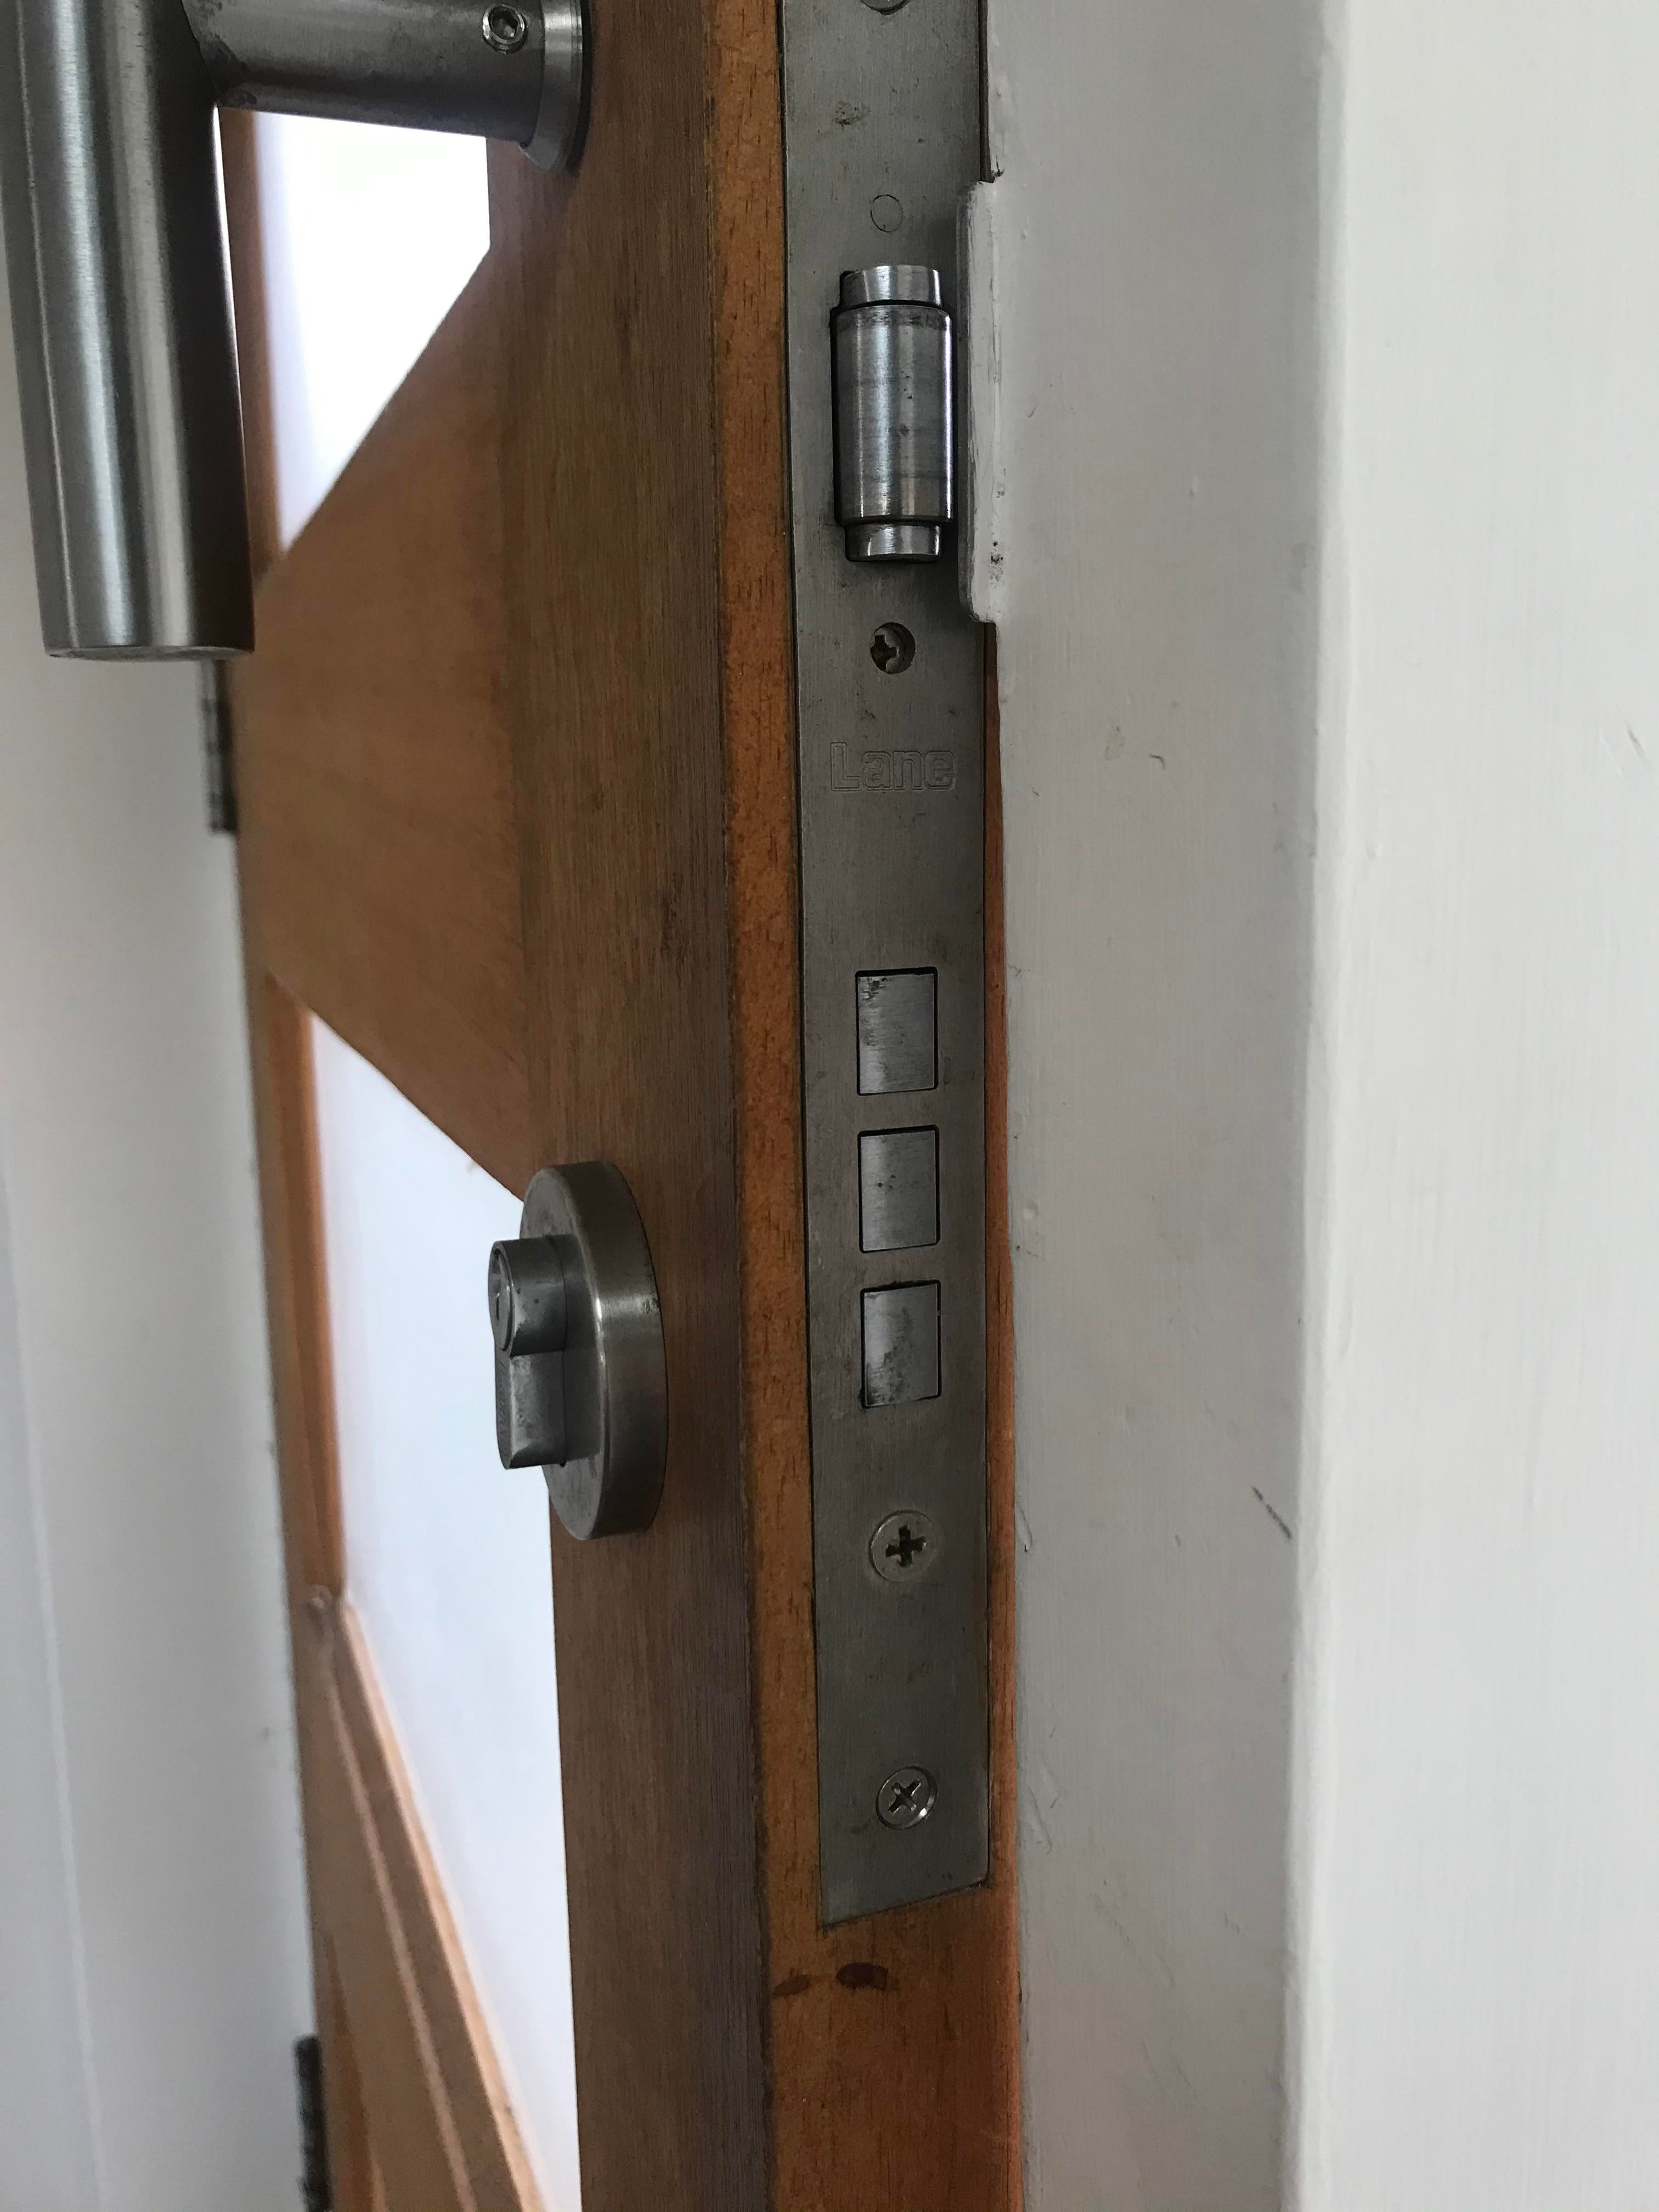 Will a built in smart lock such as a level lock